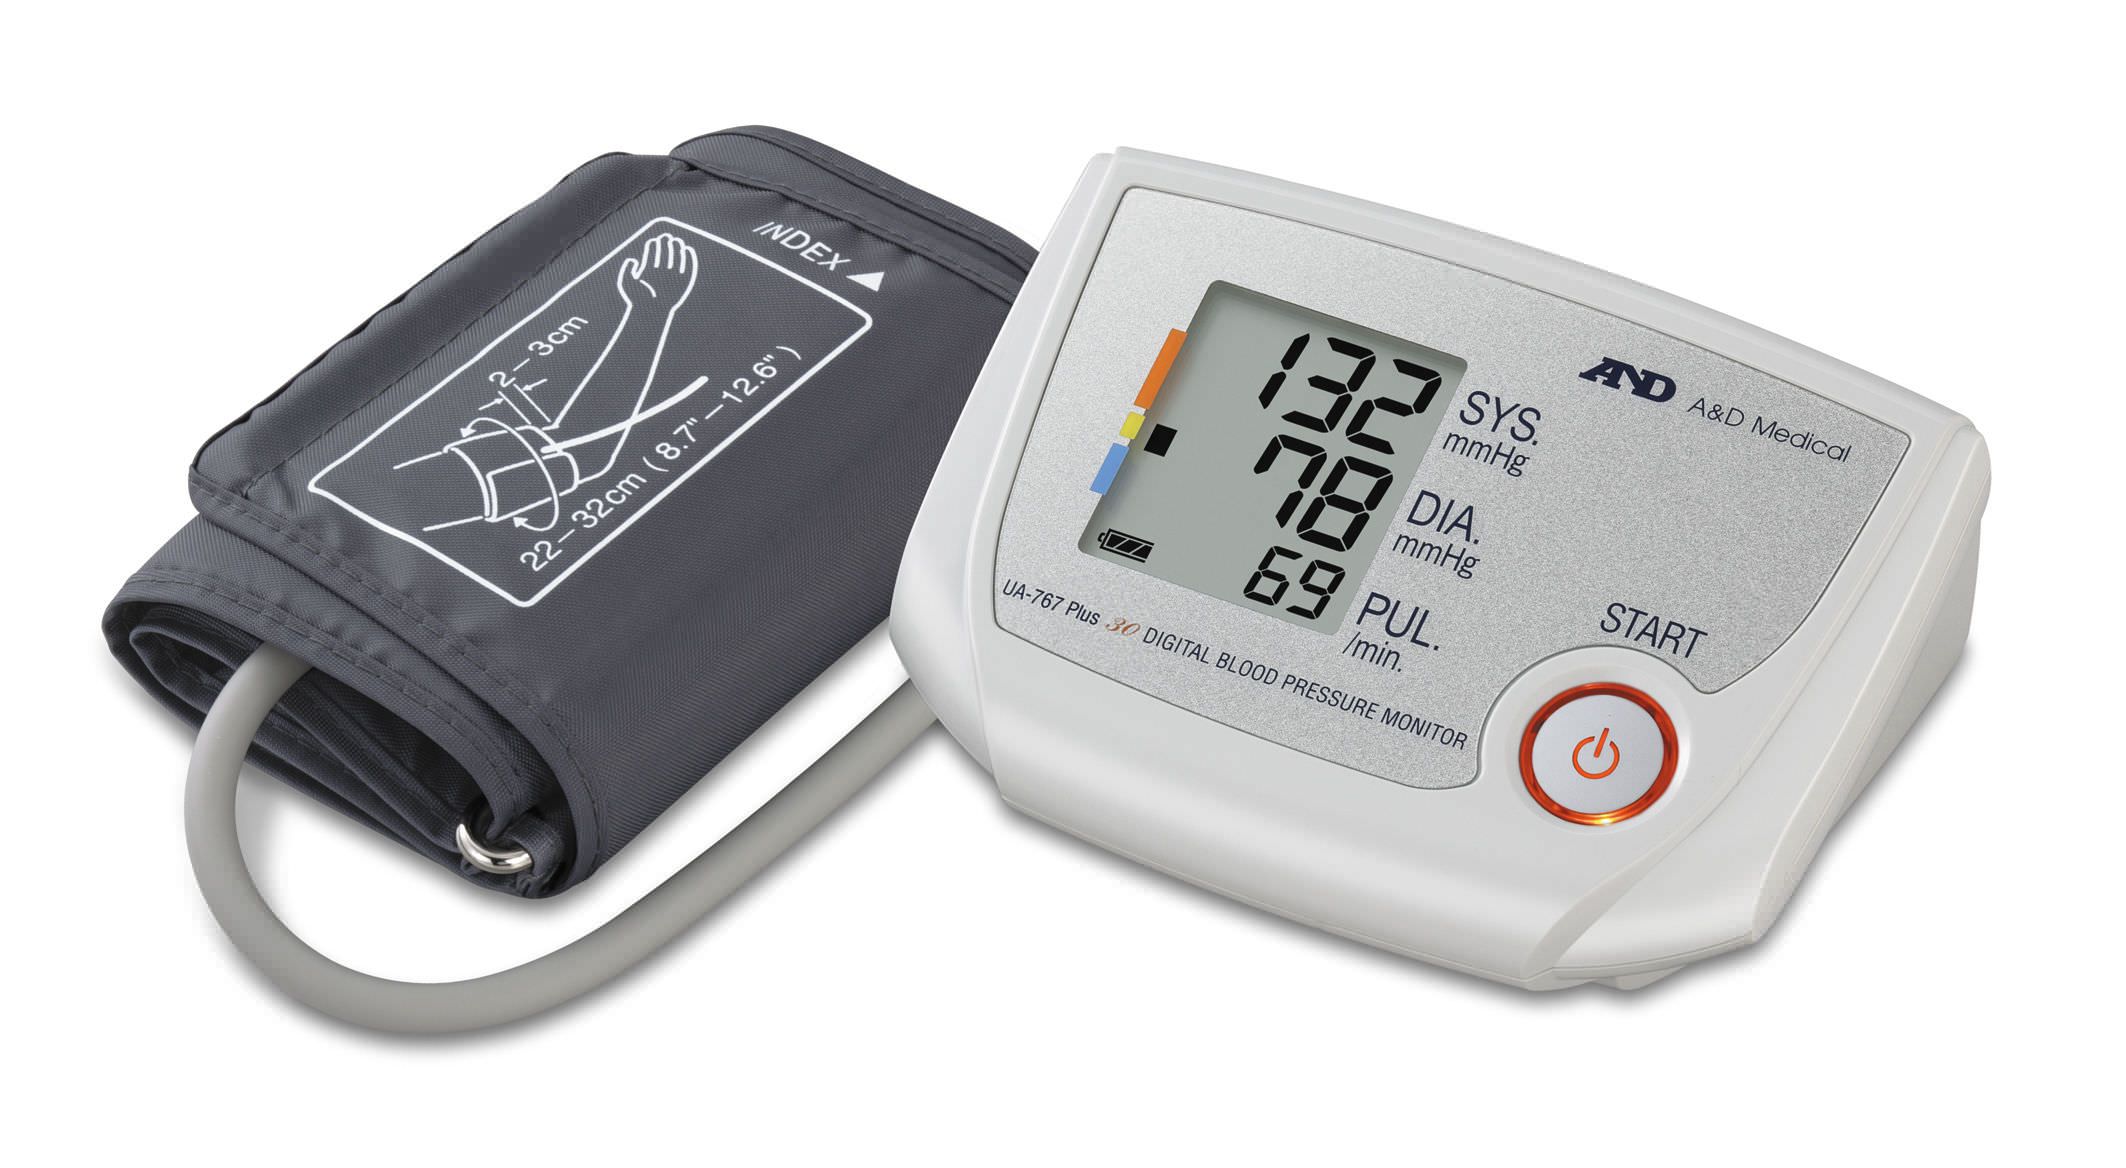 Automatic blood pressure monitor / electronic / arm UA-767Plus 30 A&D Company, Limited